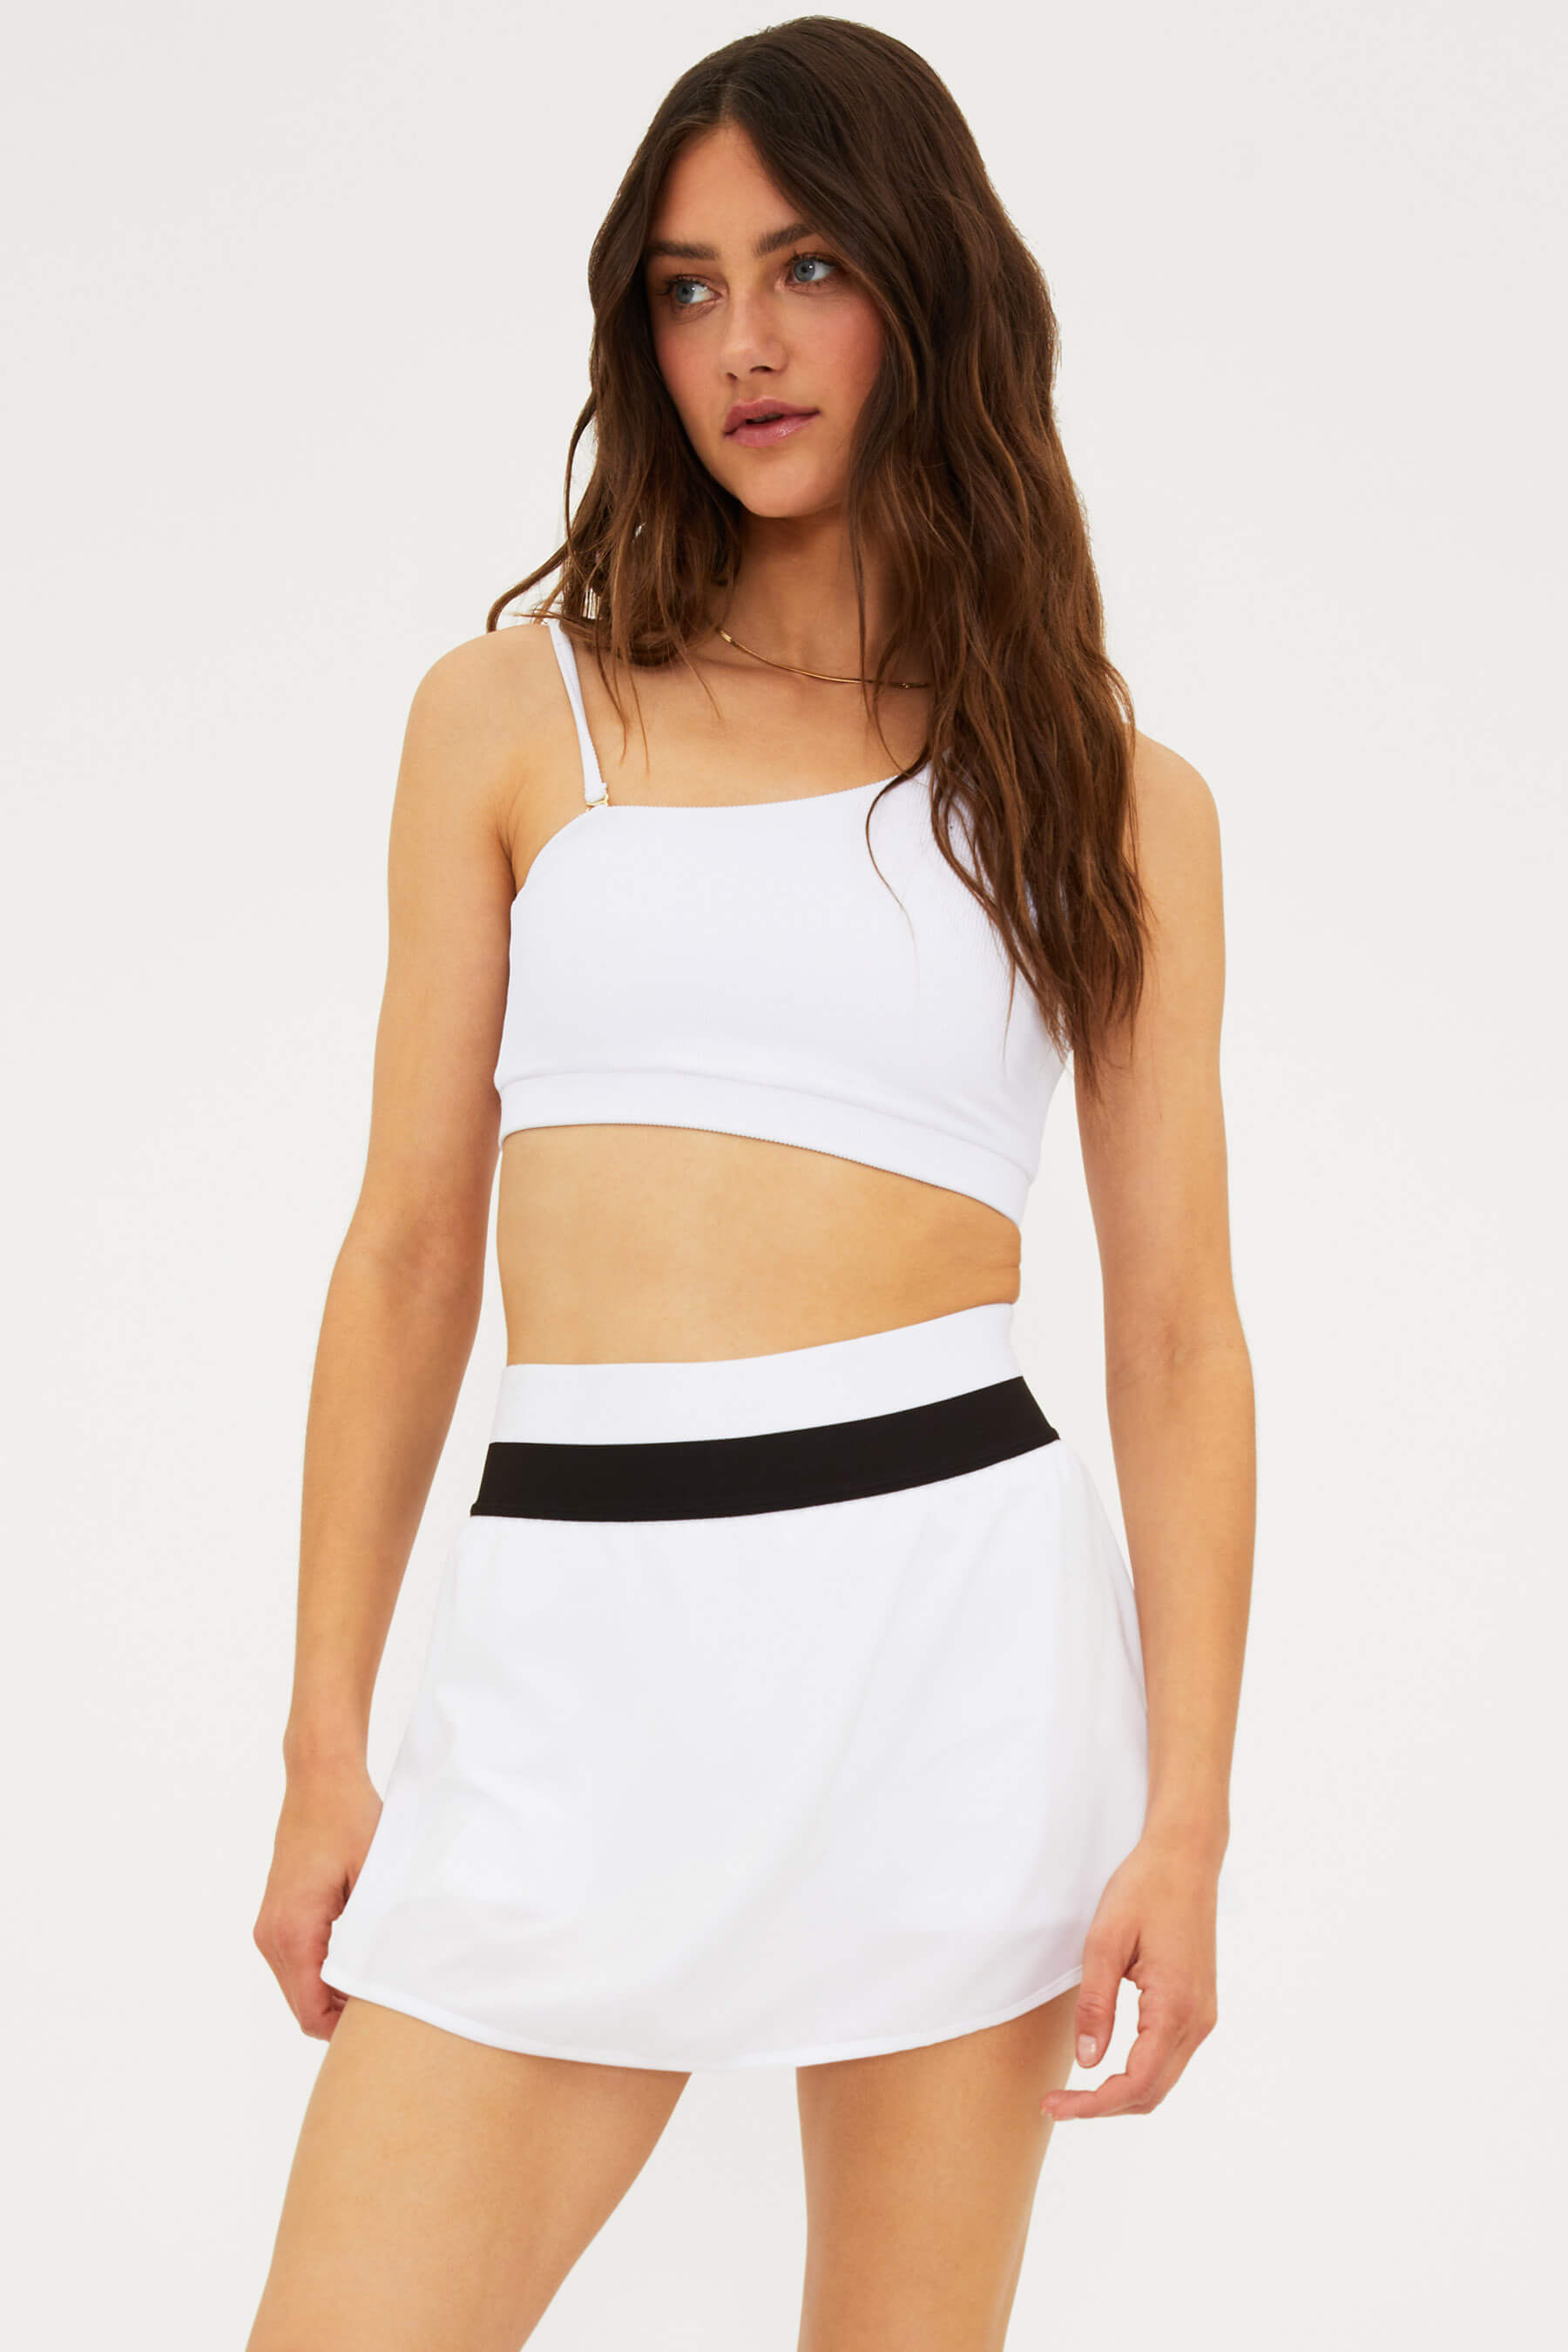 collection_black-white collection_new-arrivals collection_new-active-arrivals collection_sport-riot